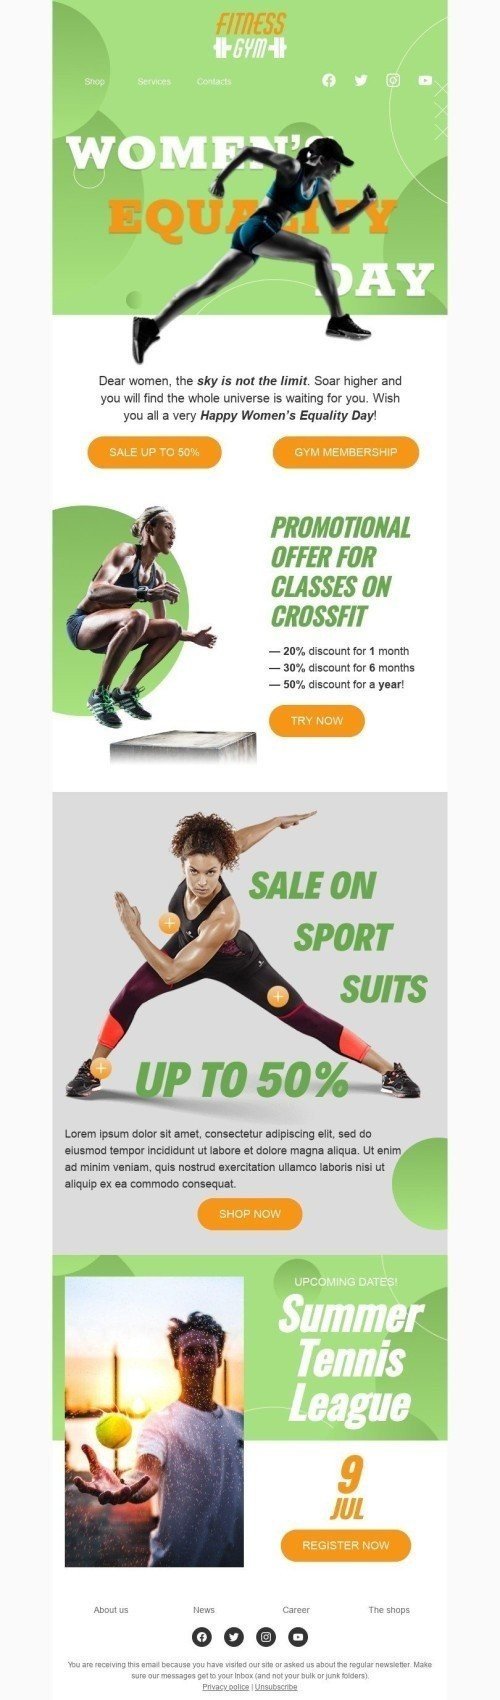 Women's Equality Day Email Template «Gym membership» for Sports industry mobile view